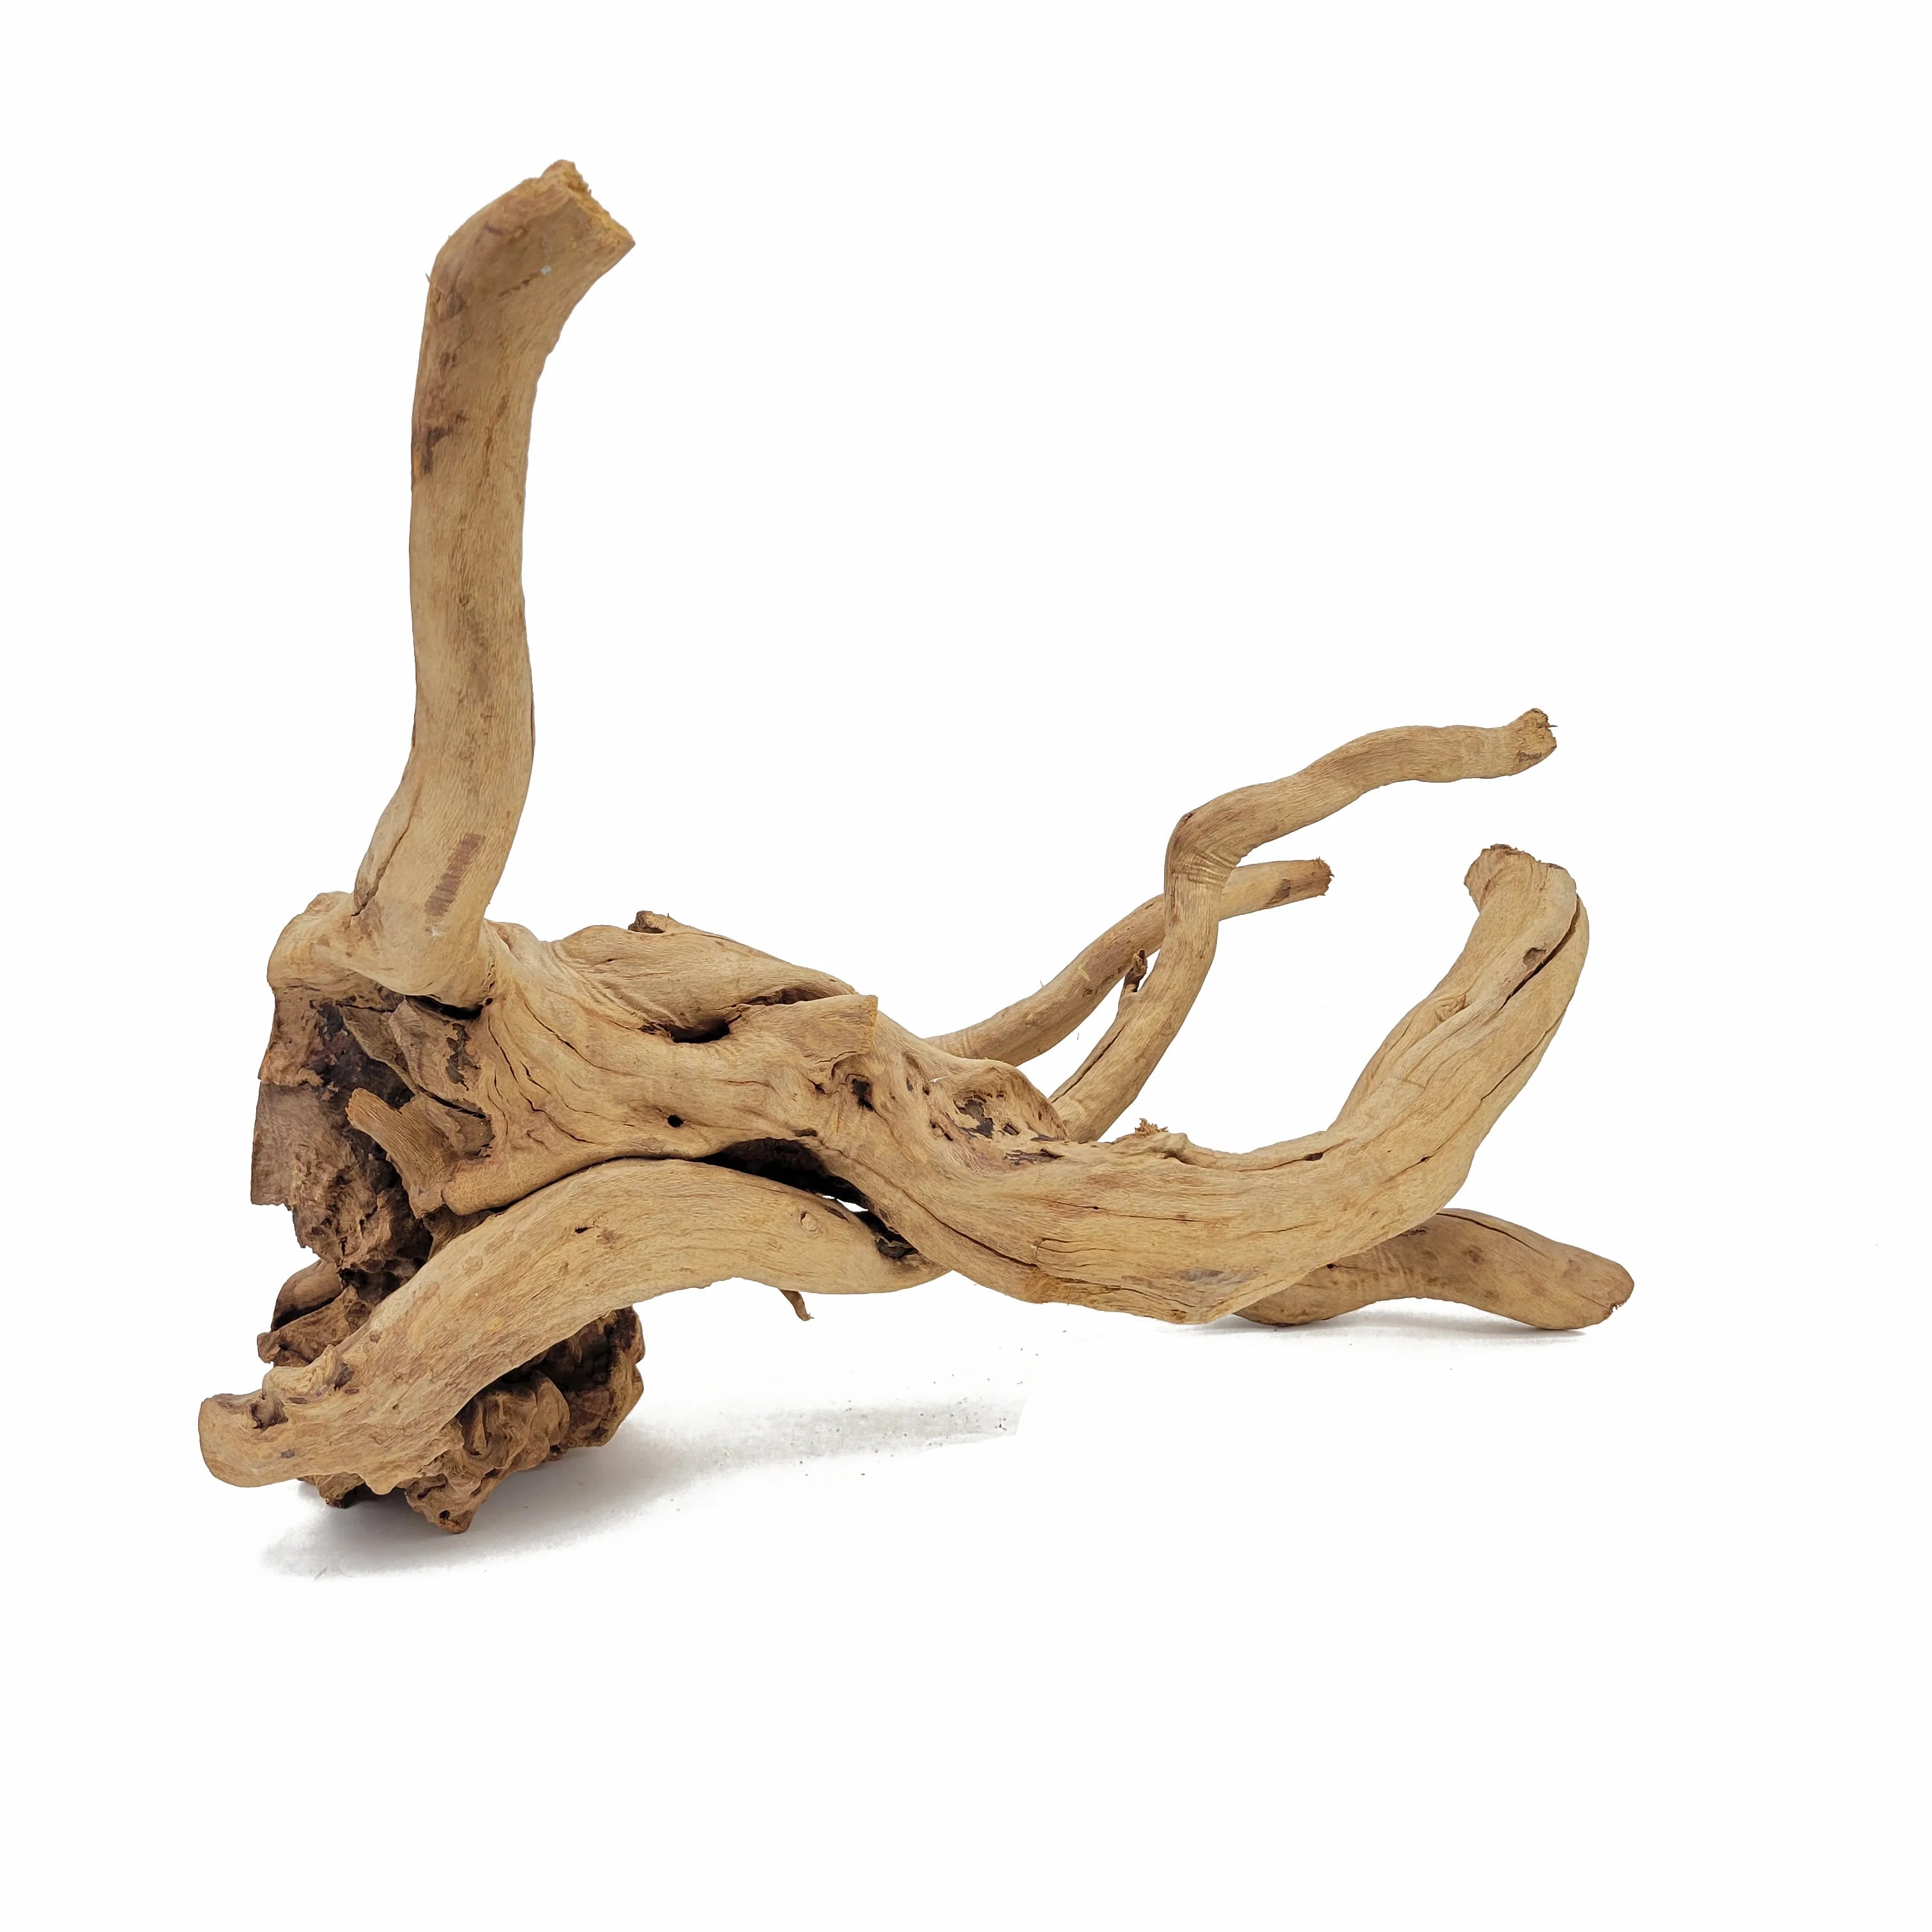 Spider Wood / Cuckoo Root - Approximate Size 12